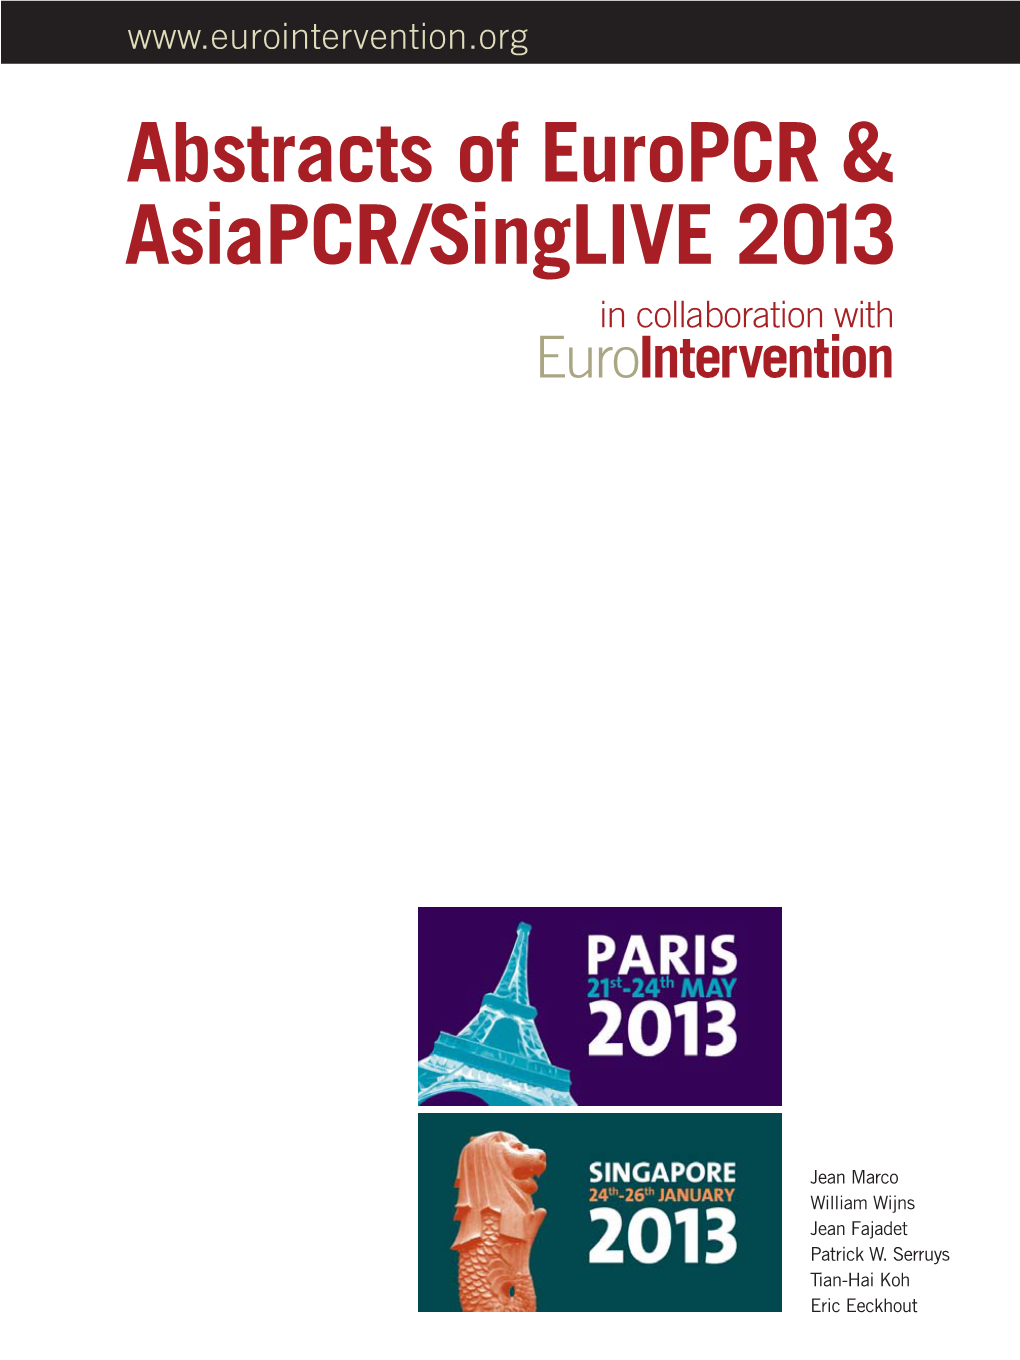 Abstracts of Europcr & Asiapcr/Singlive 2013